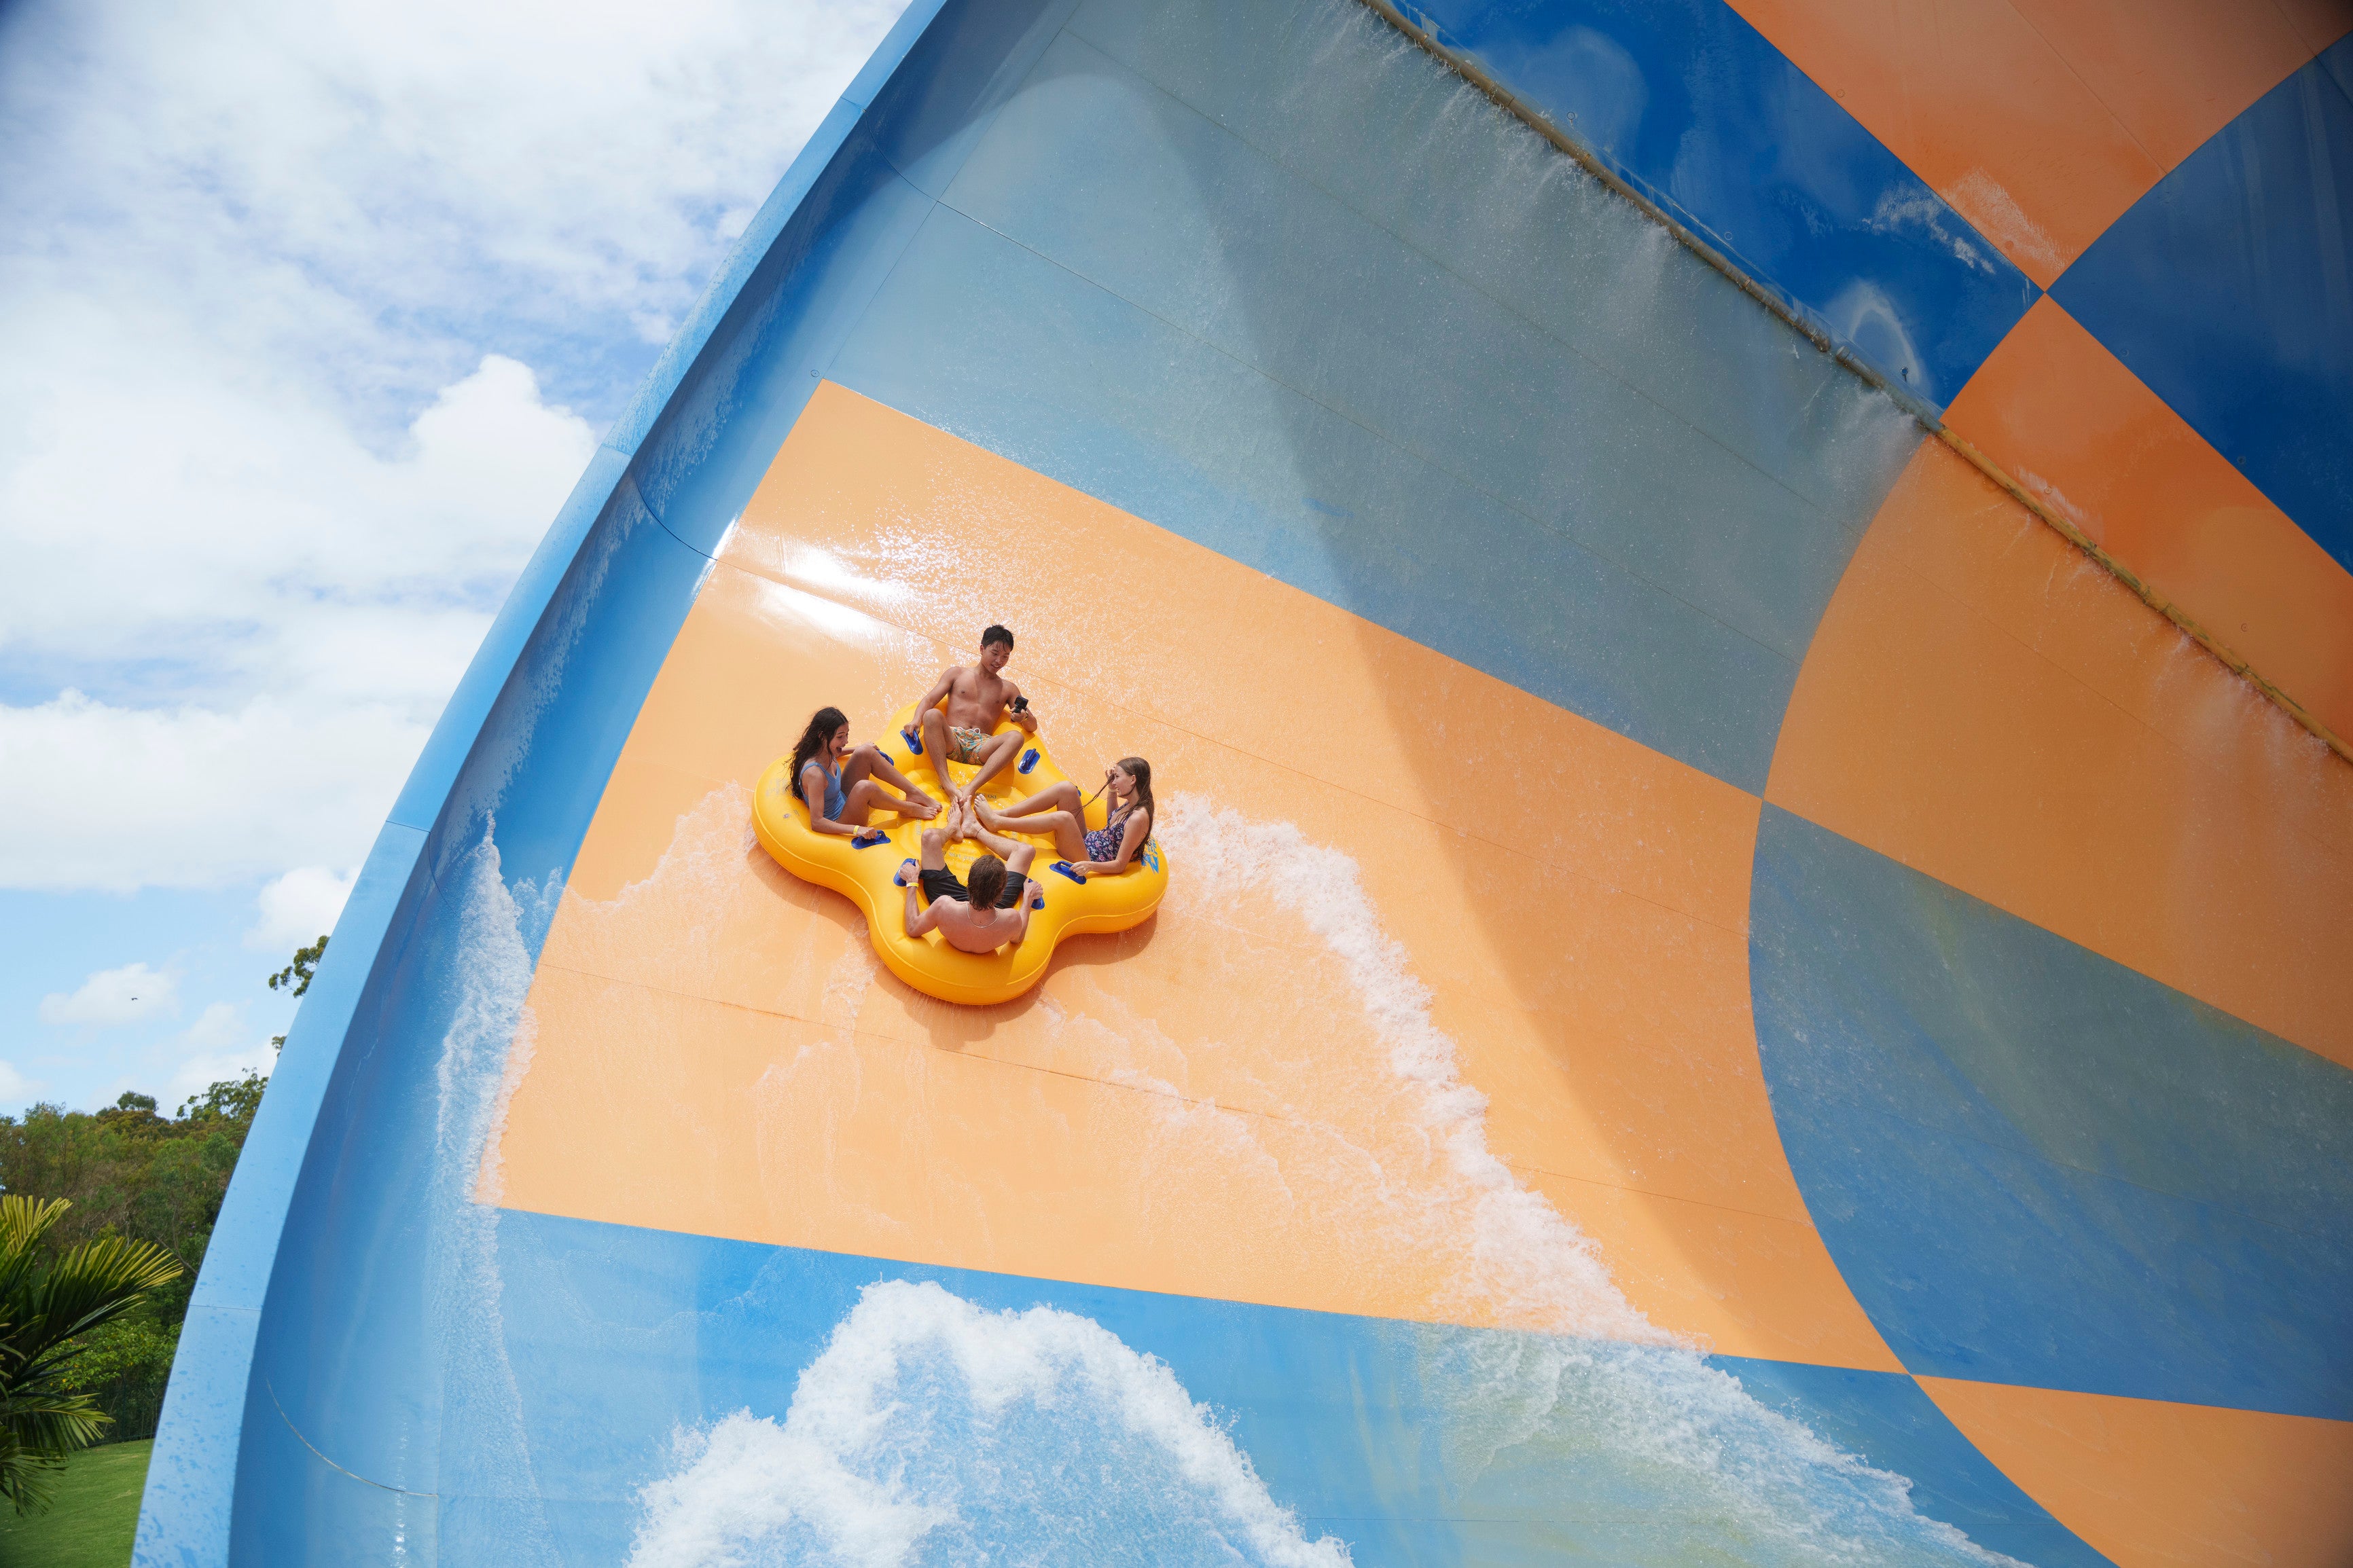 There are slides for all ages at Wet ‘n’ Wild, Australia’s biggest water park